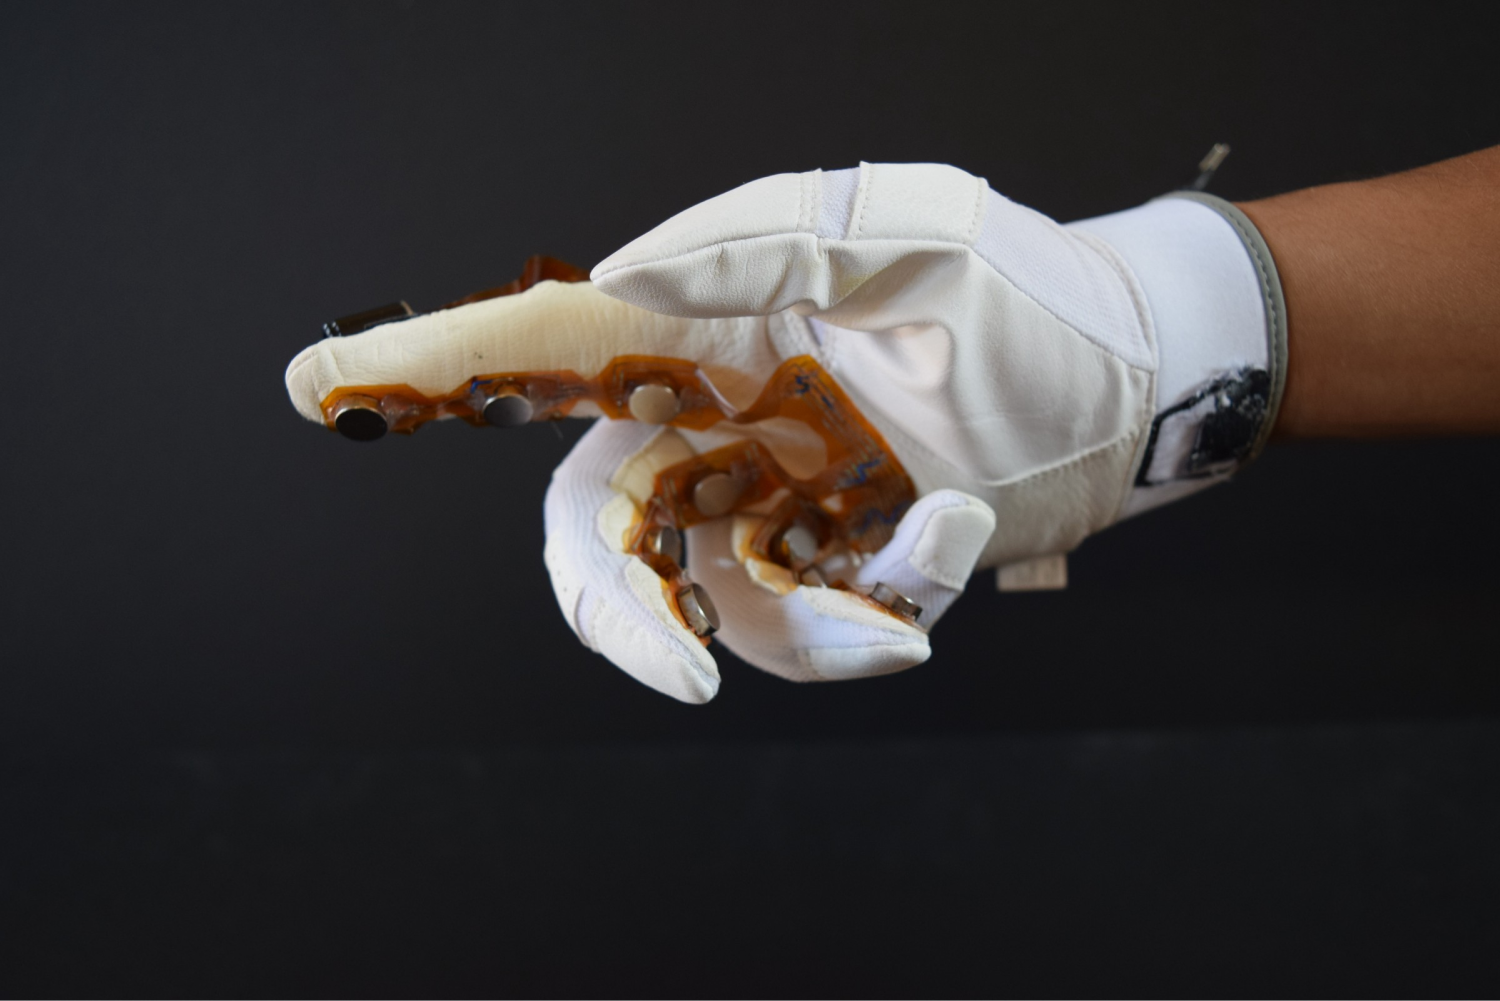  We attached vibration motors to the underside of the glove. These motors allowed the user to “feel” the temperature input from the infrared thermometer positioned at the tip of the index finger. This could be used for professionals that work in extr